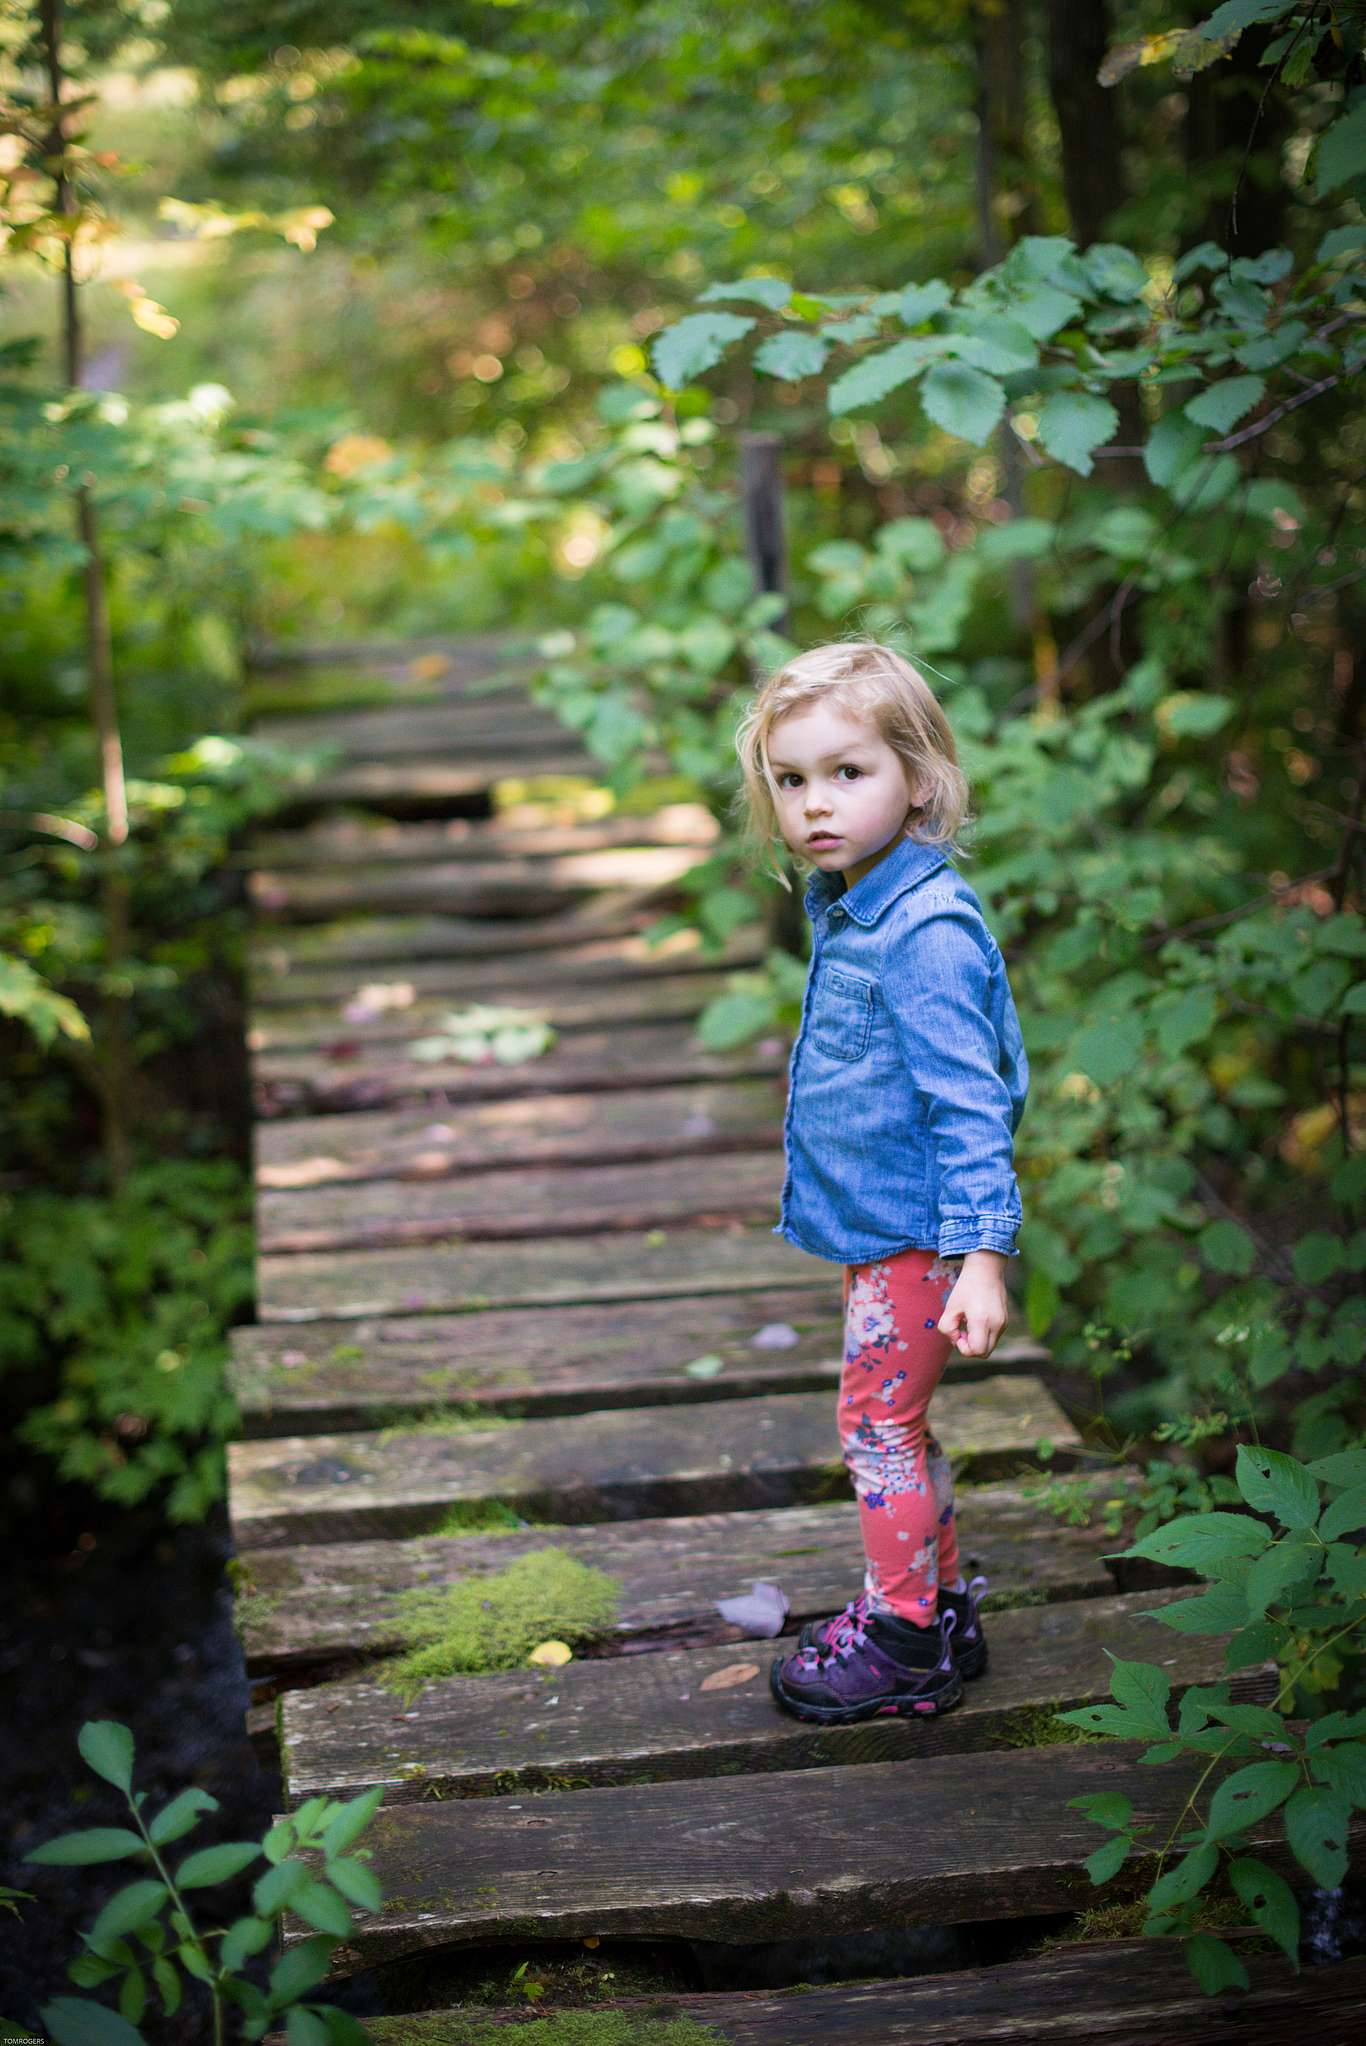 A young girl on a wooden bridge